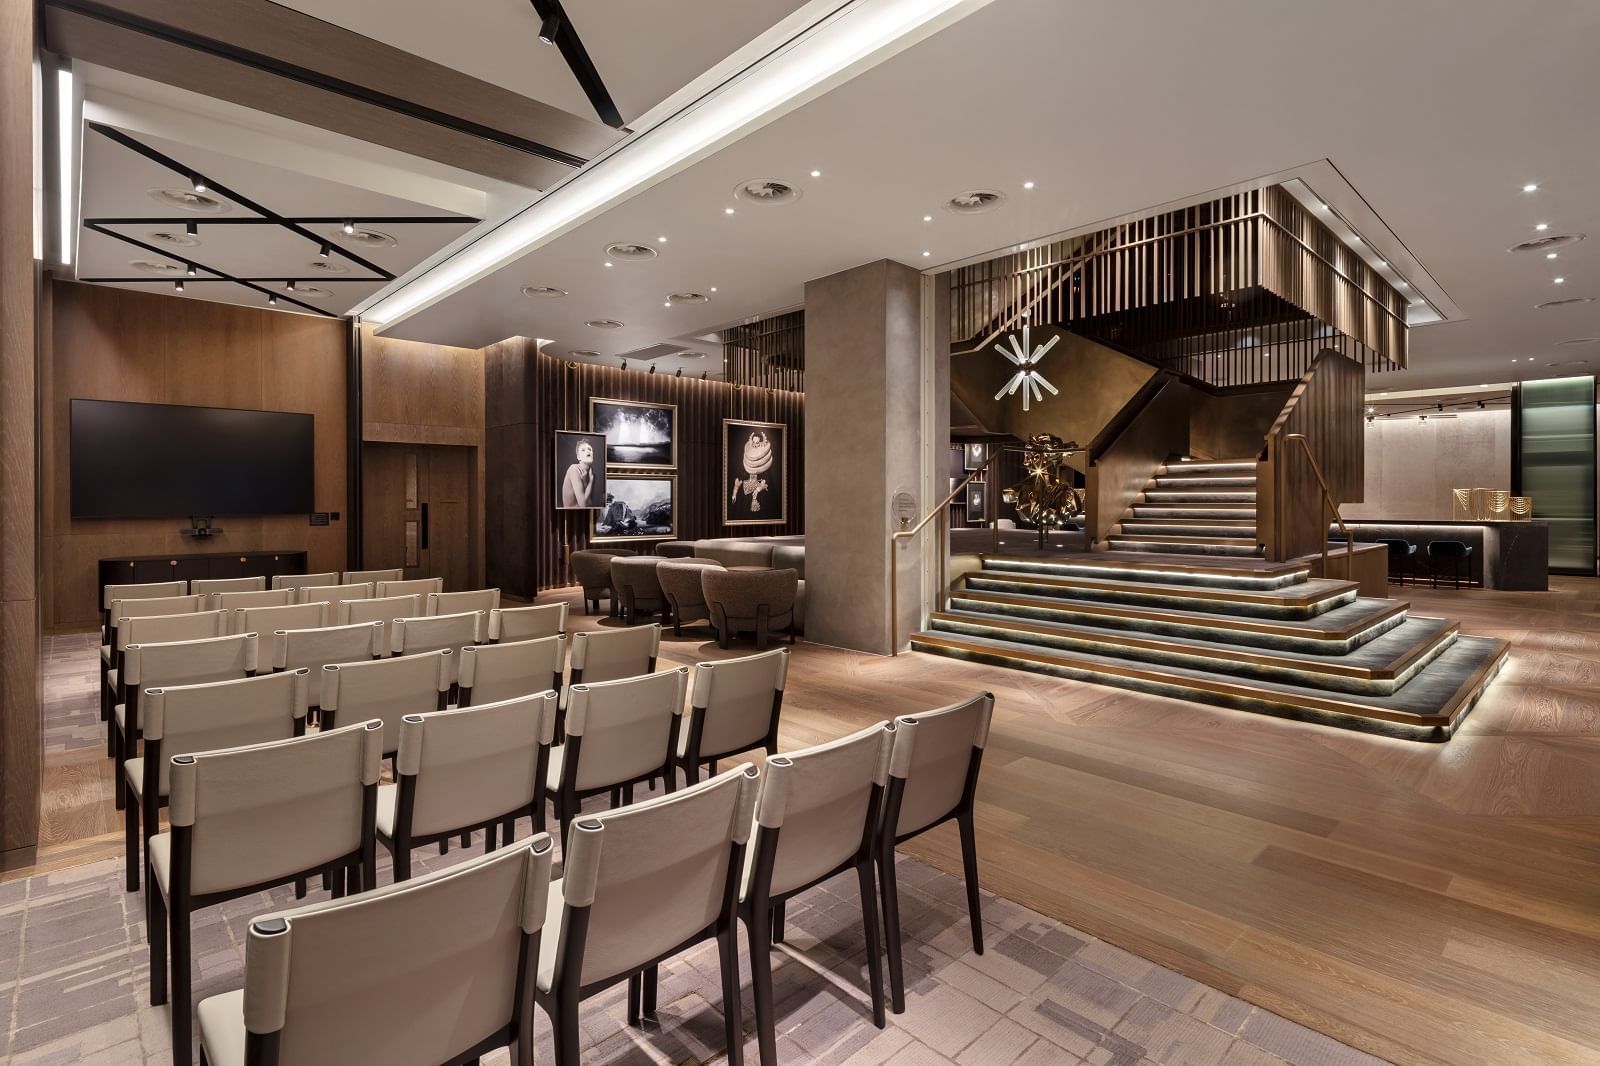 Concept design of a Theatre setup in the lobby at The Londoner